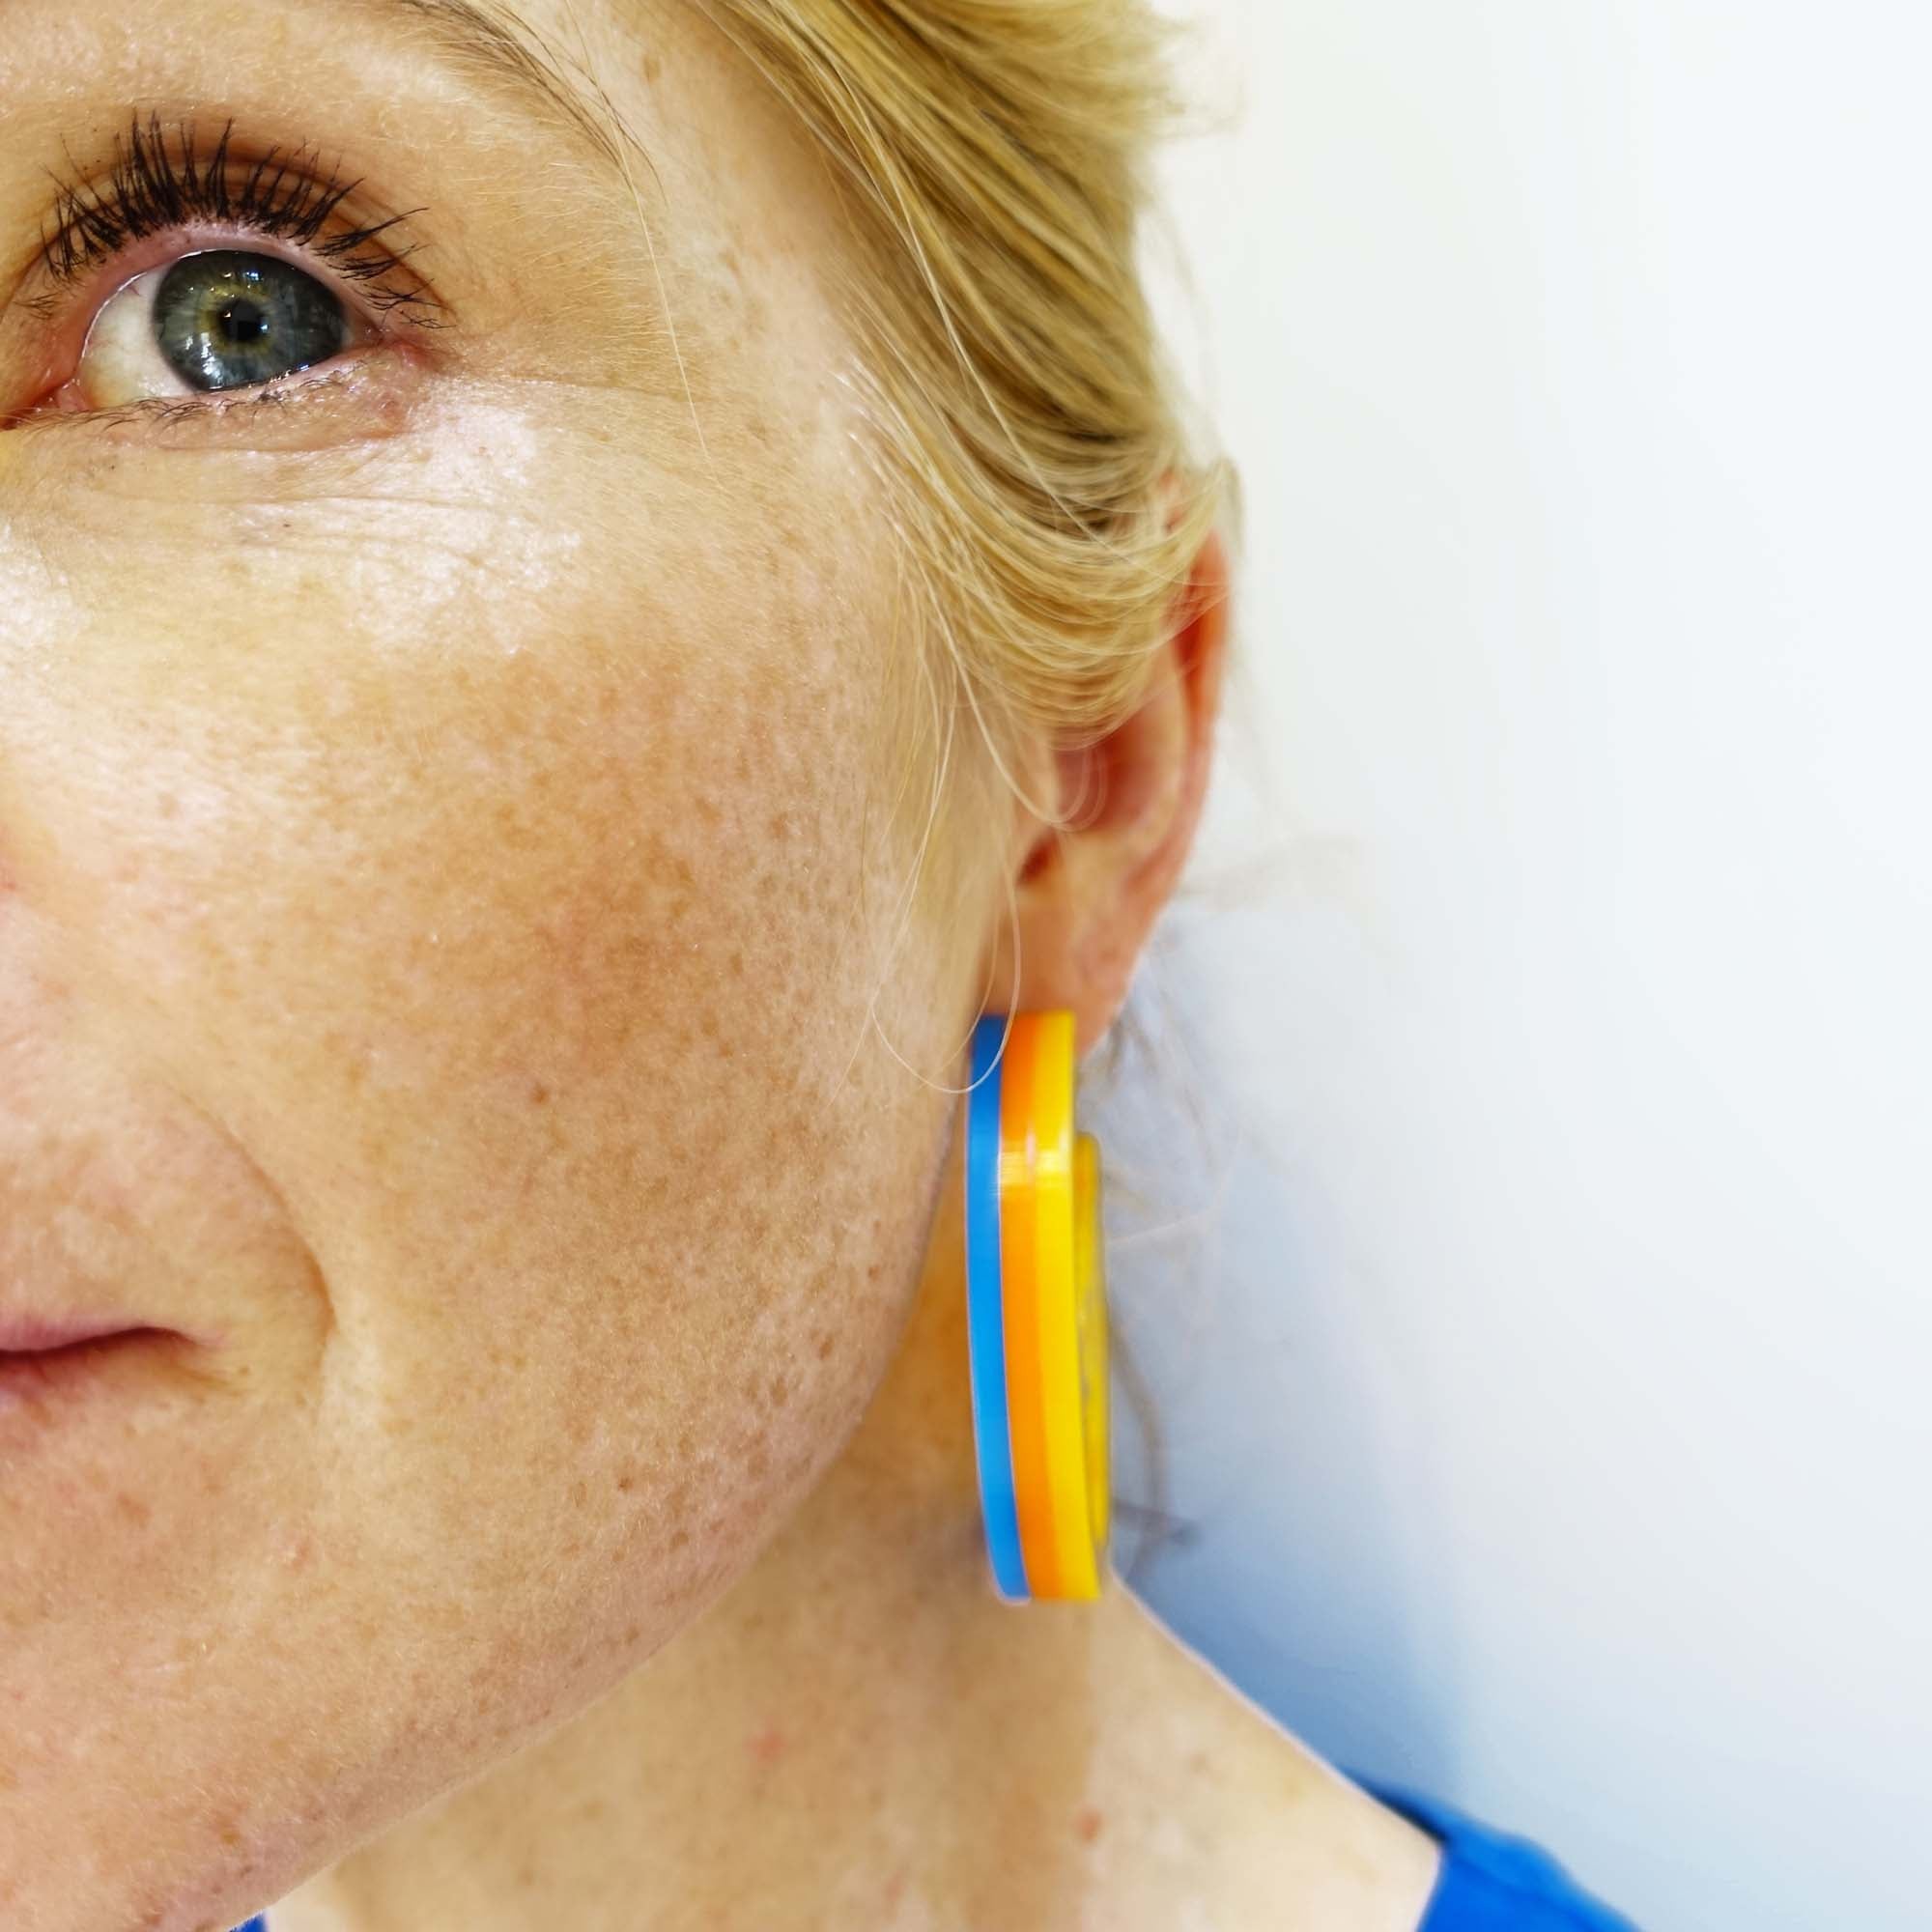 Model wears Roller Disco sunflower yellow orange and blue Suffragette trio in Parma violet, white and avocado Mary Beard Women & Power earrings, statement hoops